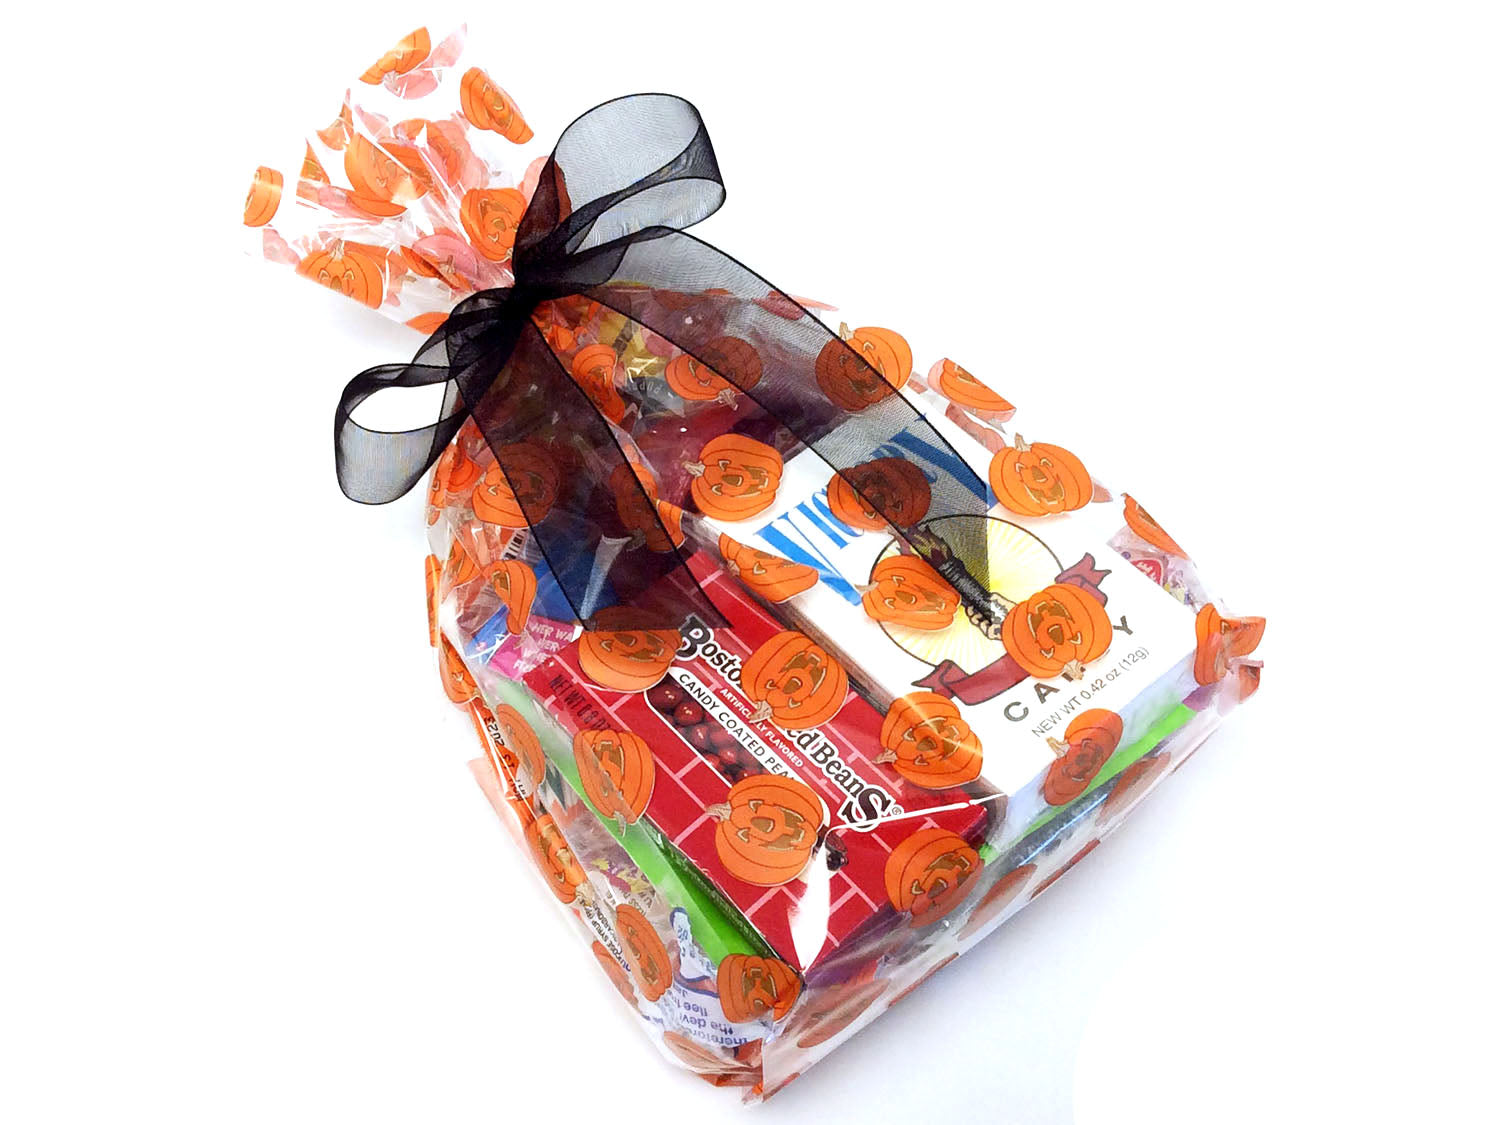 Party Favor Bag with candy - Jack-O-Lanterns